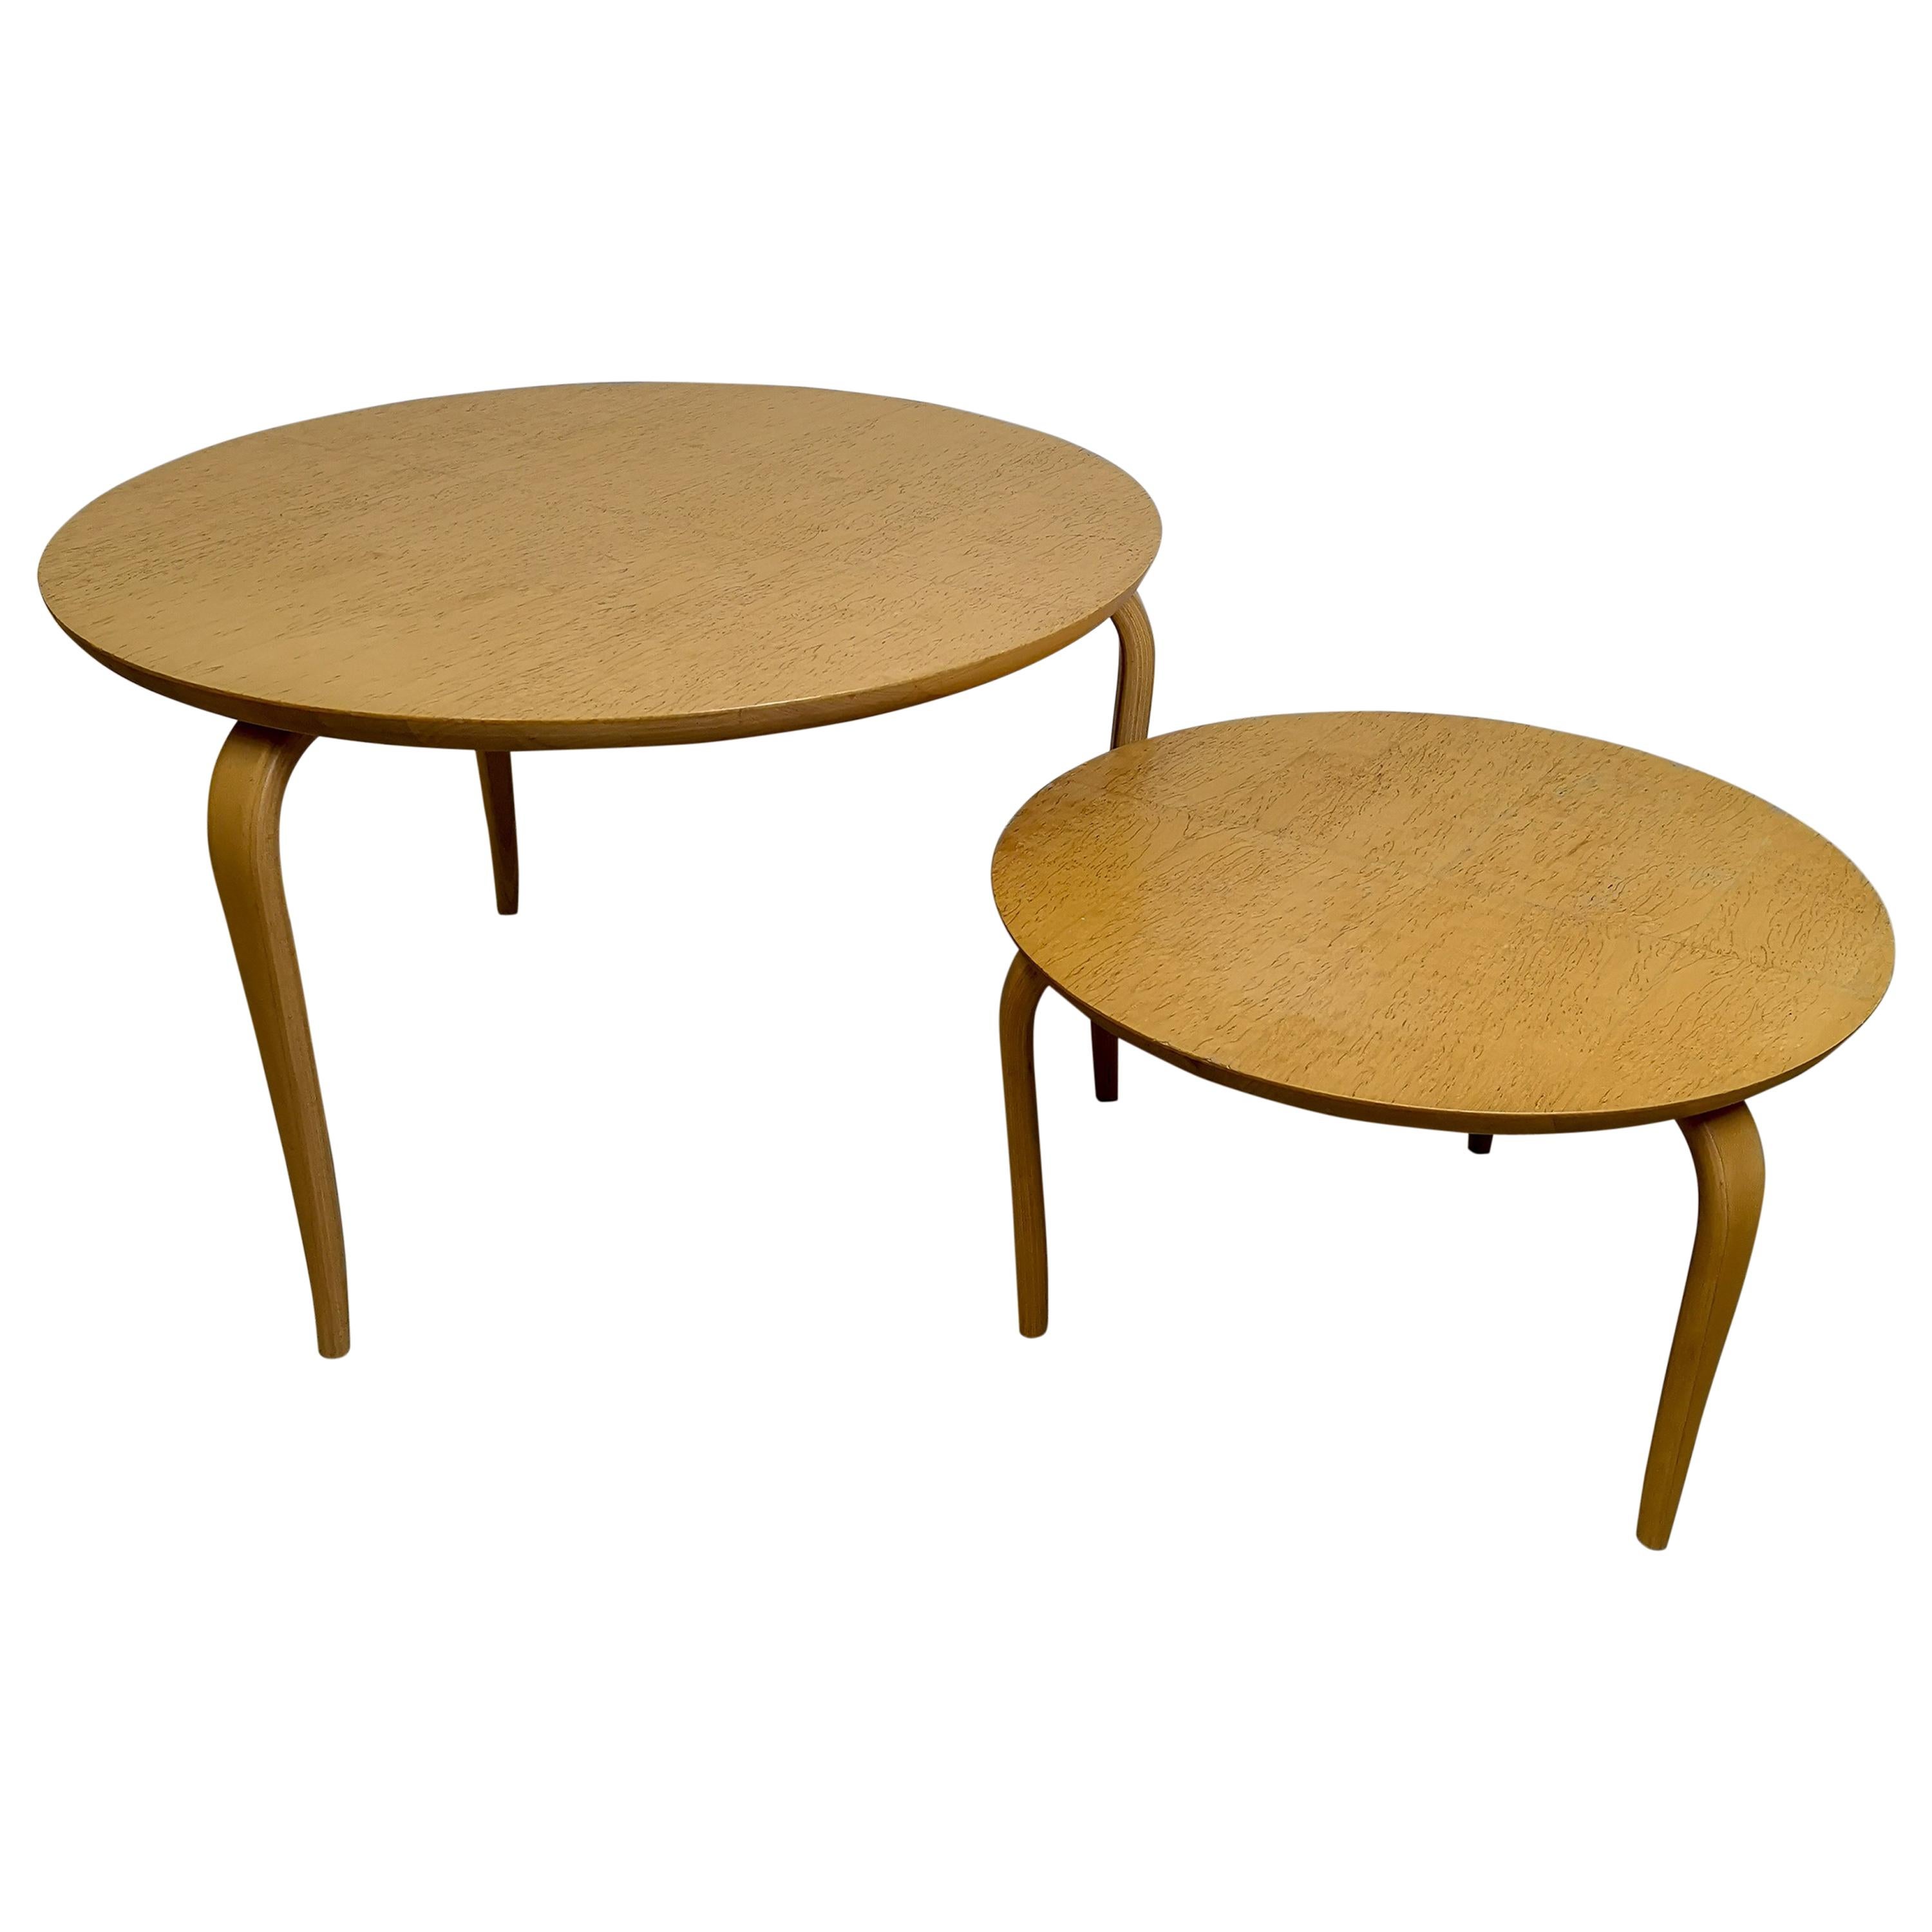 Pair of Occasional Tables Annika Designed by Bruno Mathsson